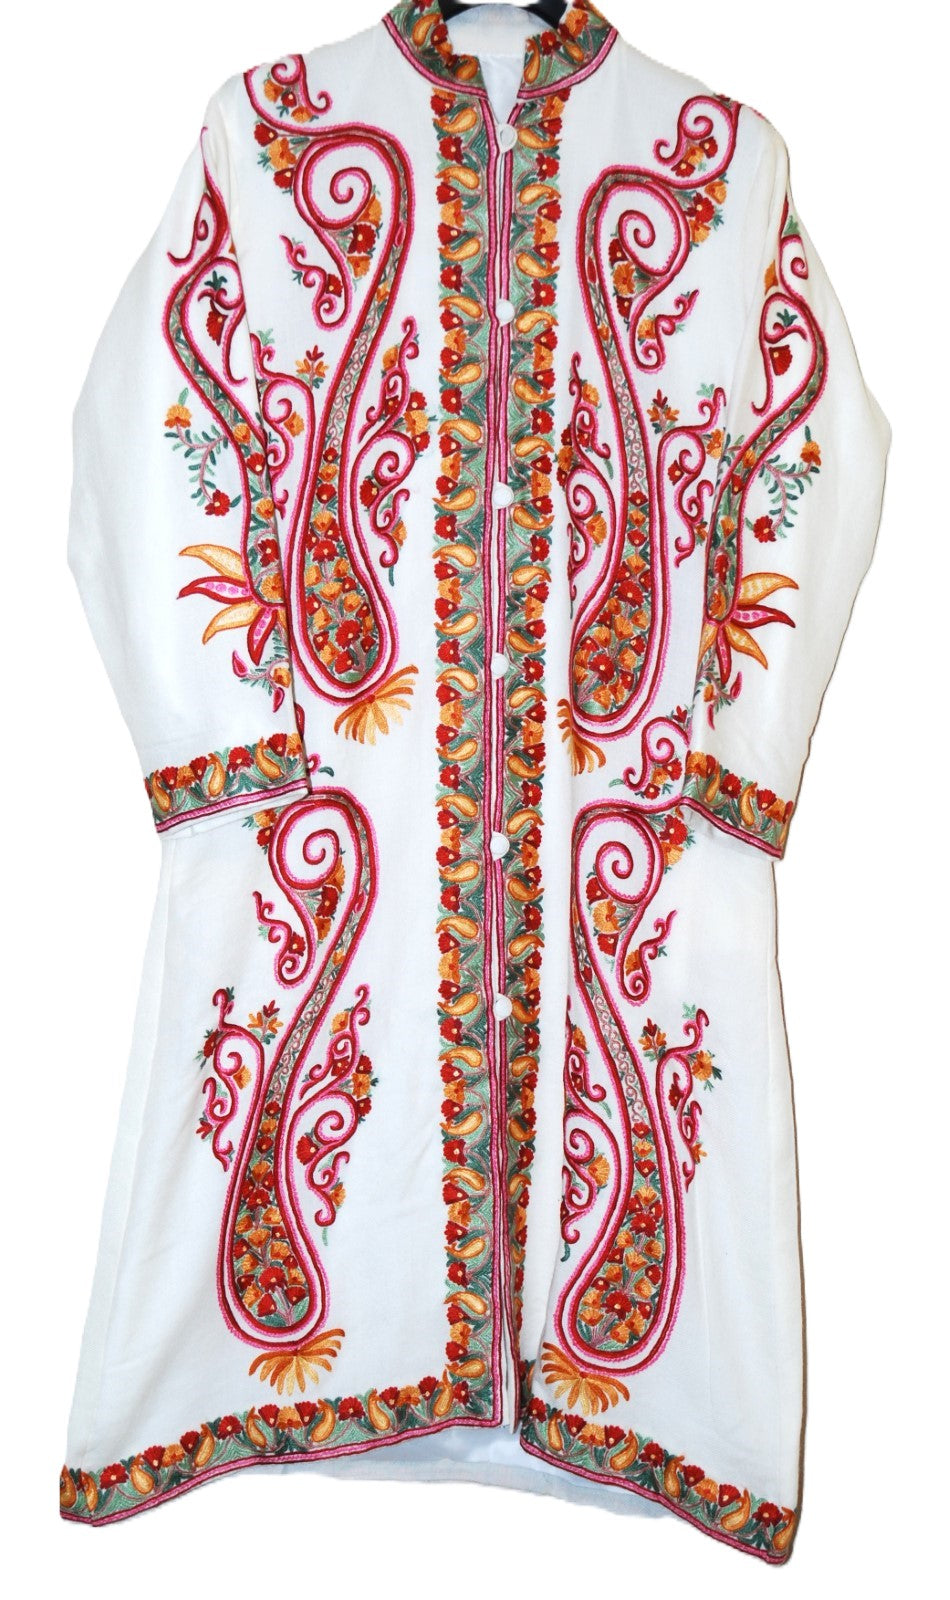 Embroidered Coat Woolen Long Jacket White, Multicolor Embroidery #AO-179